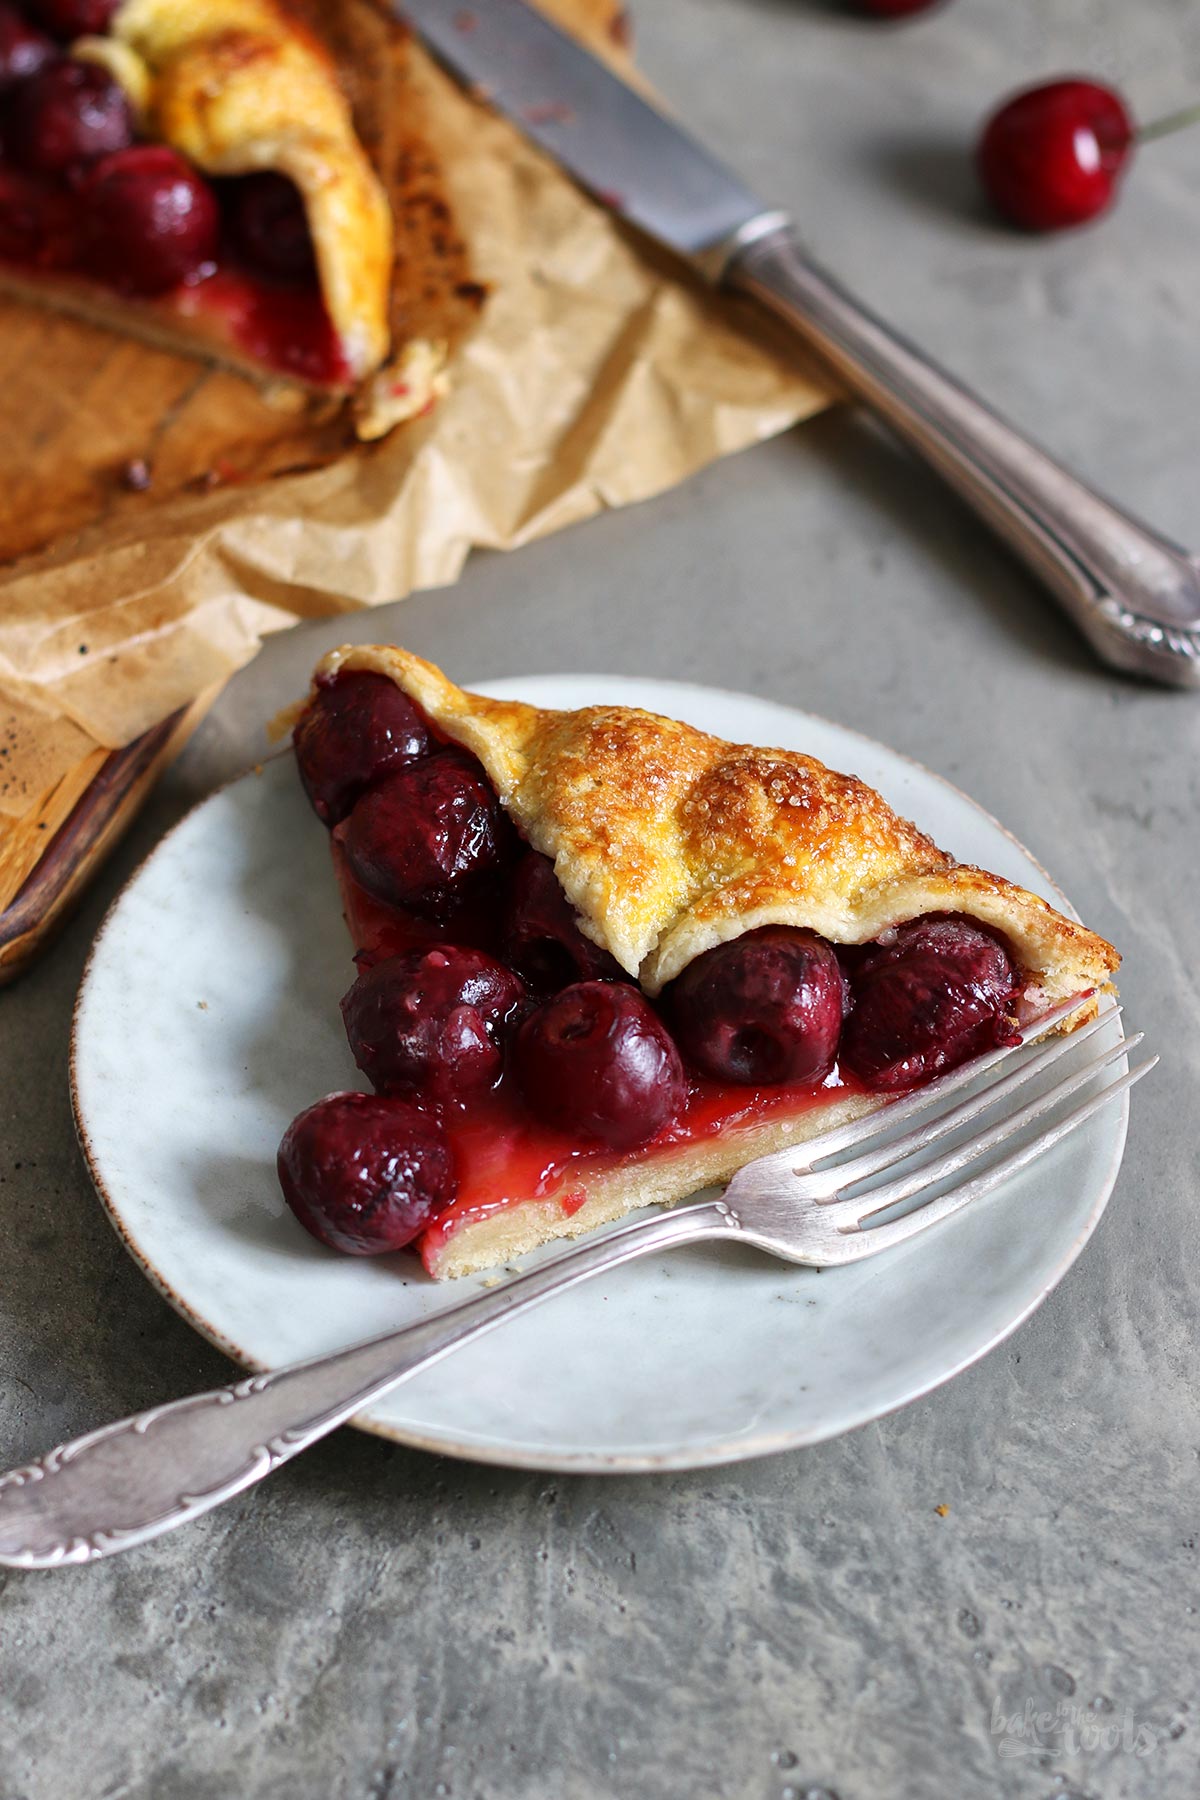 Cherry (Star) Galette | Bake to the roots